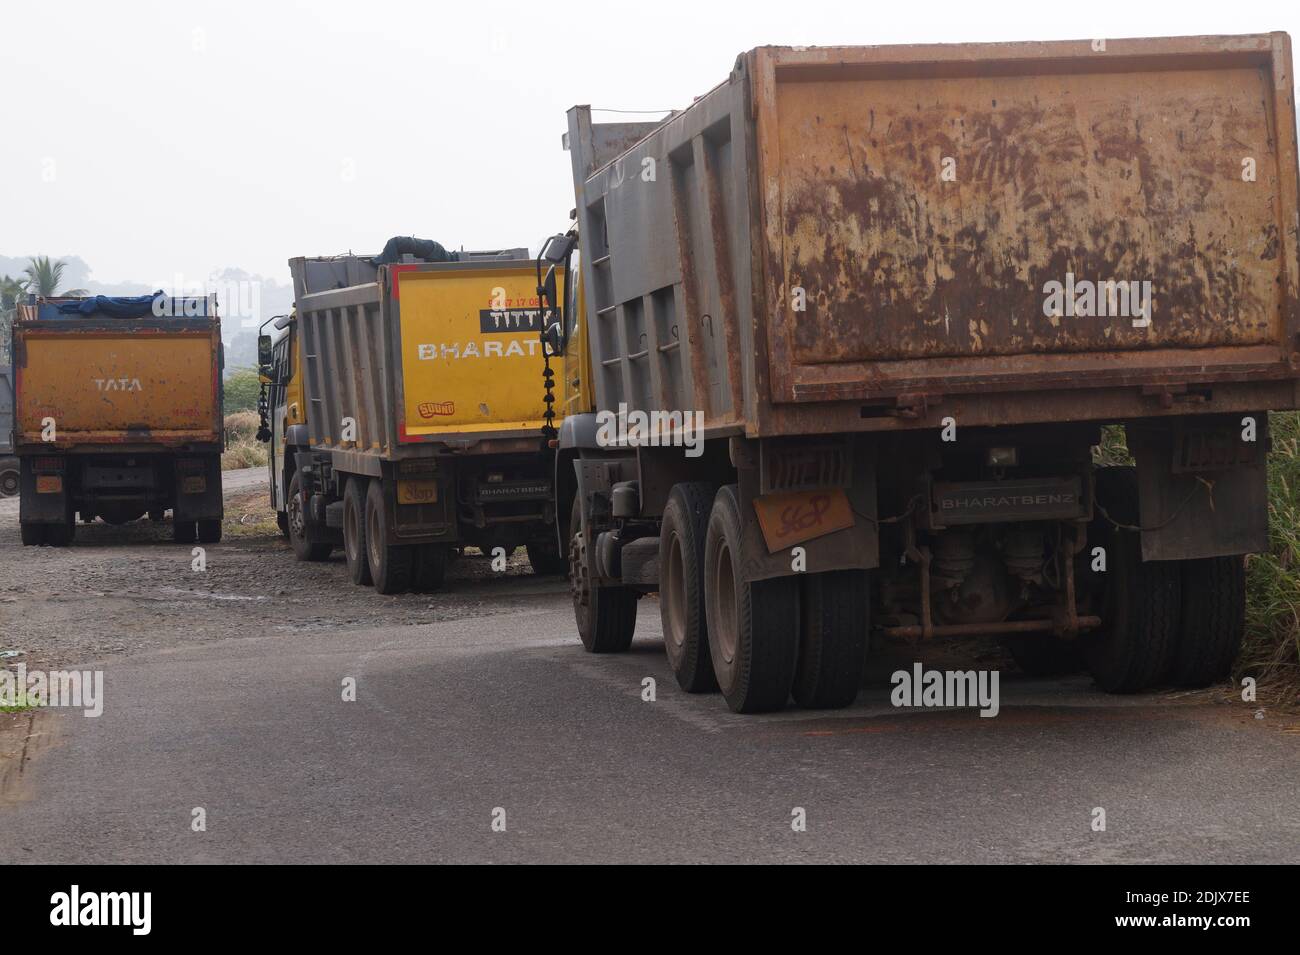 Thrissur, Kerala, India - 11-26-2020: Tipper lorries parked on the side of a road Stock Photo